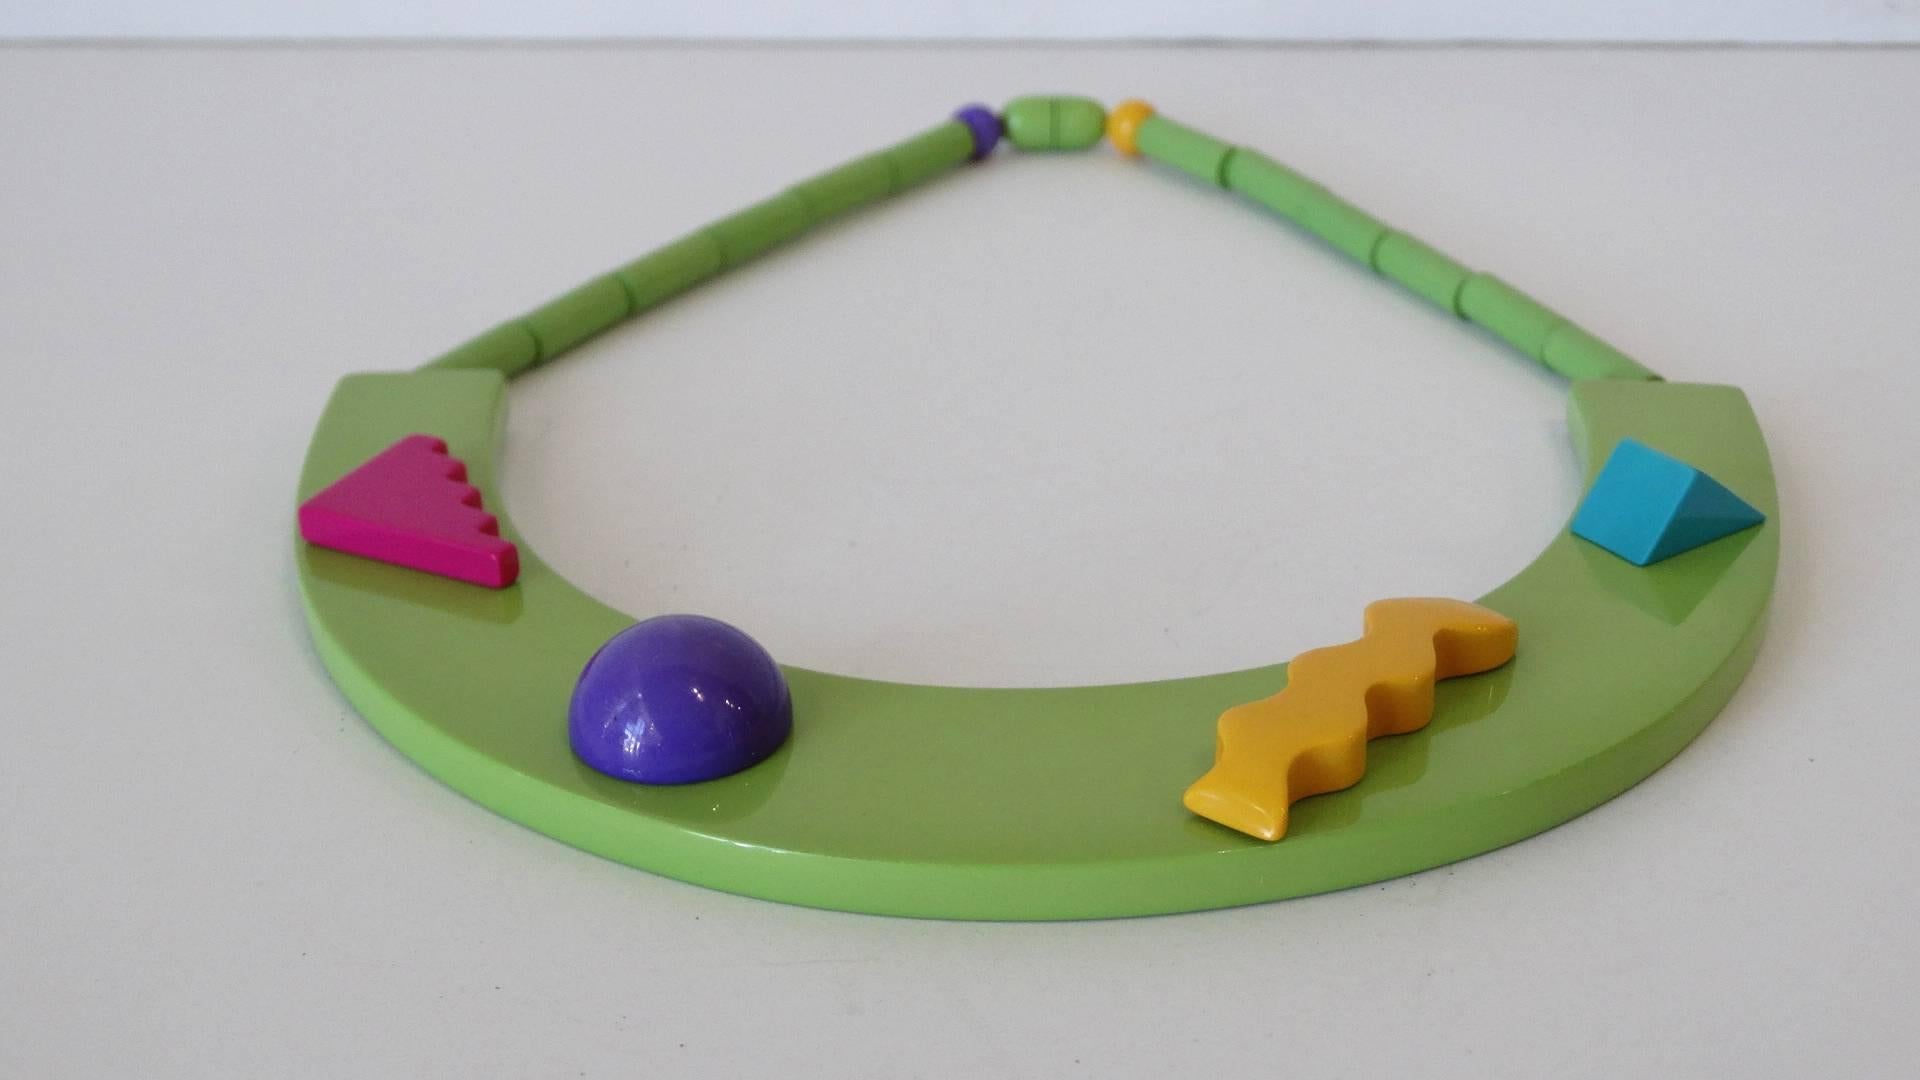 This abstract and multicolored necklace is a statement piece made for anyone! This piece exhibits influence from the Memphis Milano Movement. Unique, structural and colorful, this apple green necklace adds flair to any outfit!

From the 70′s, would